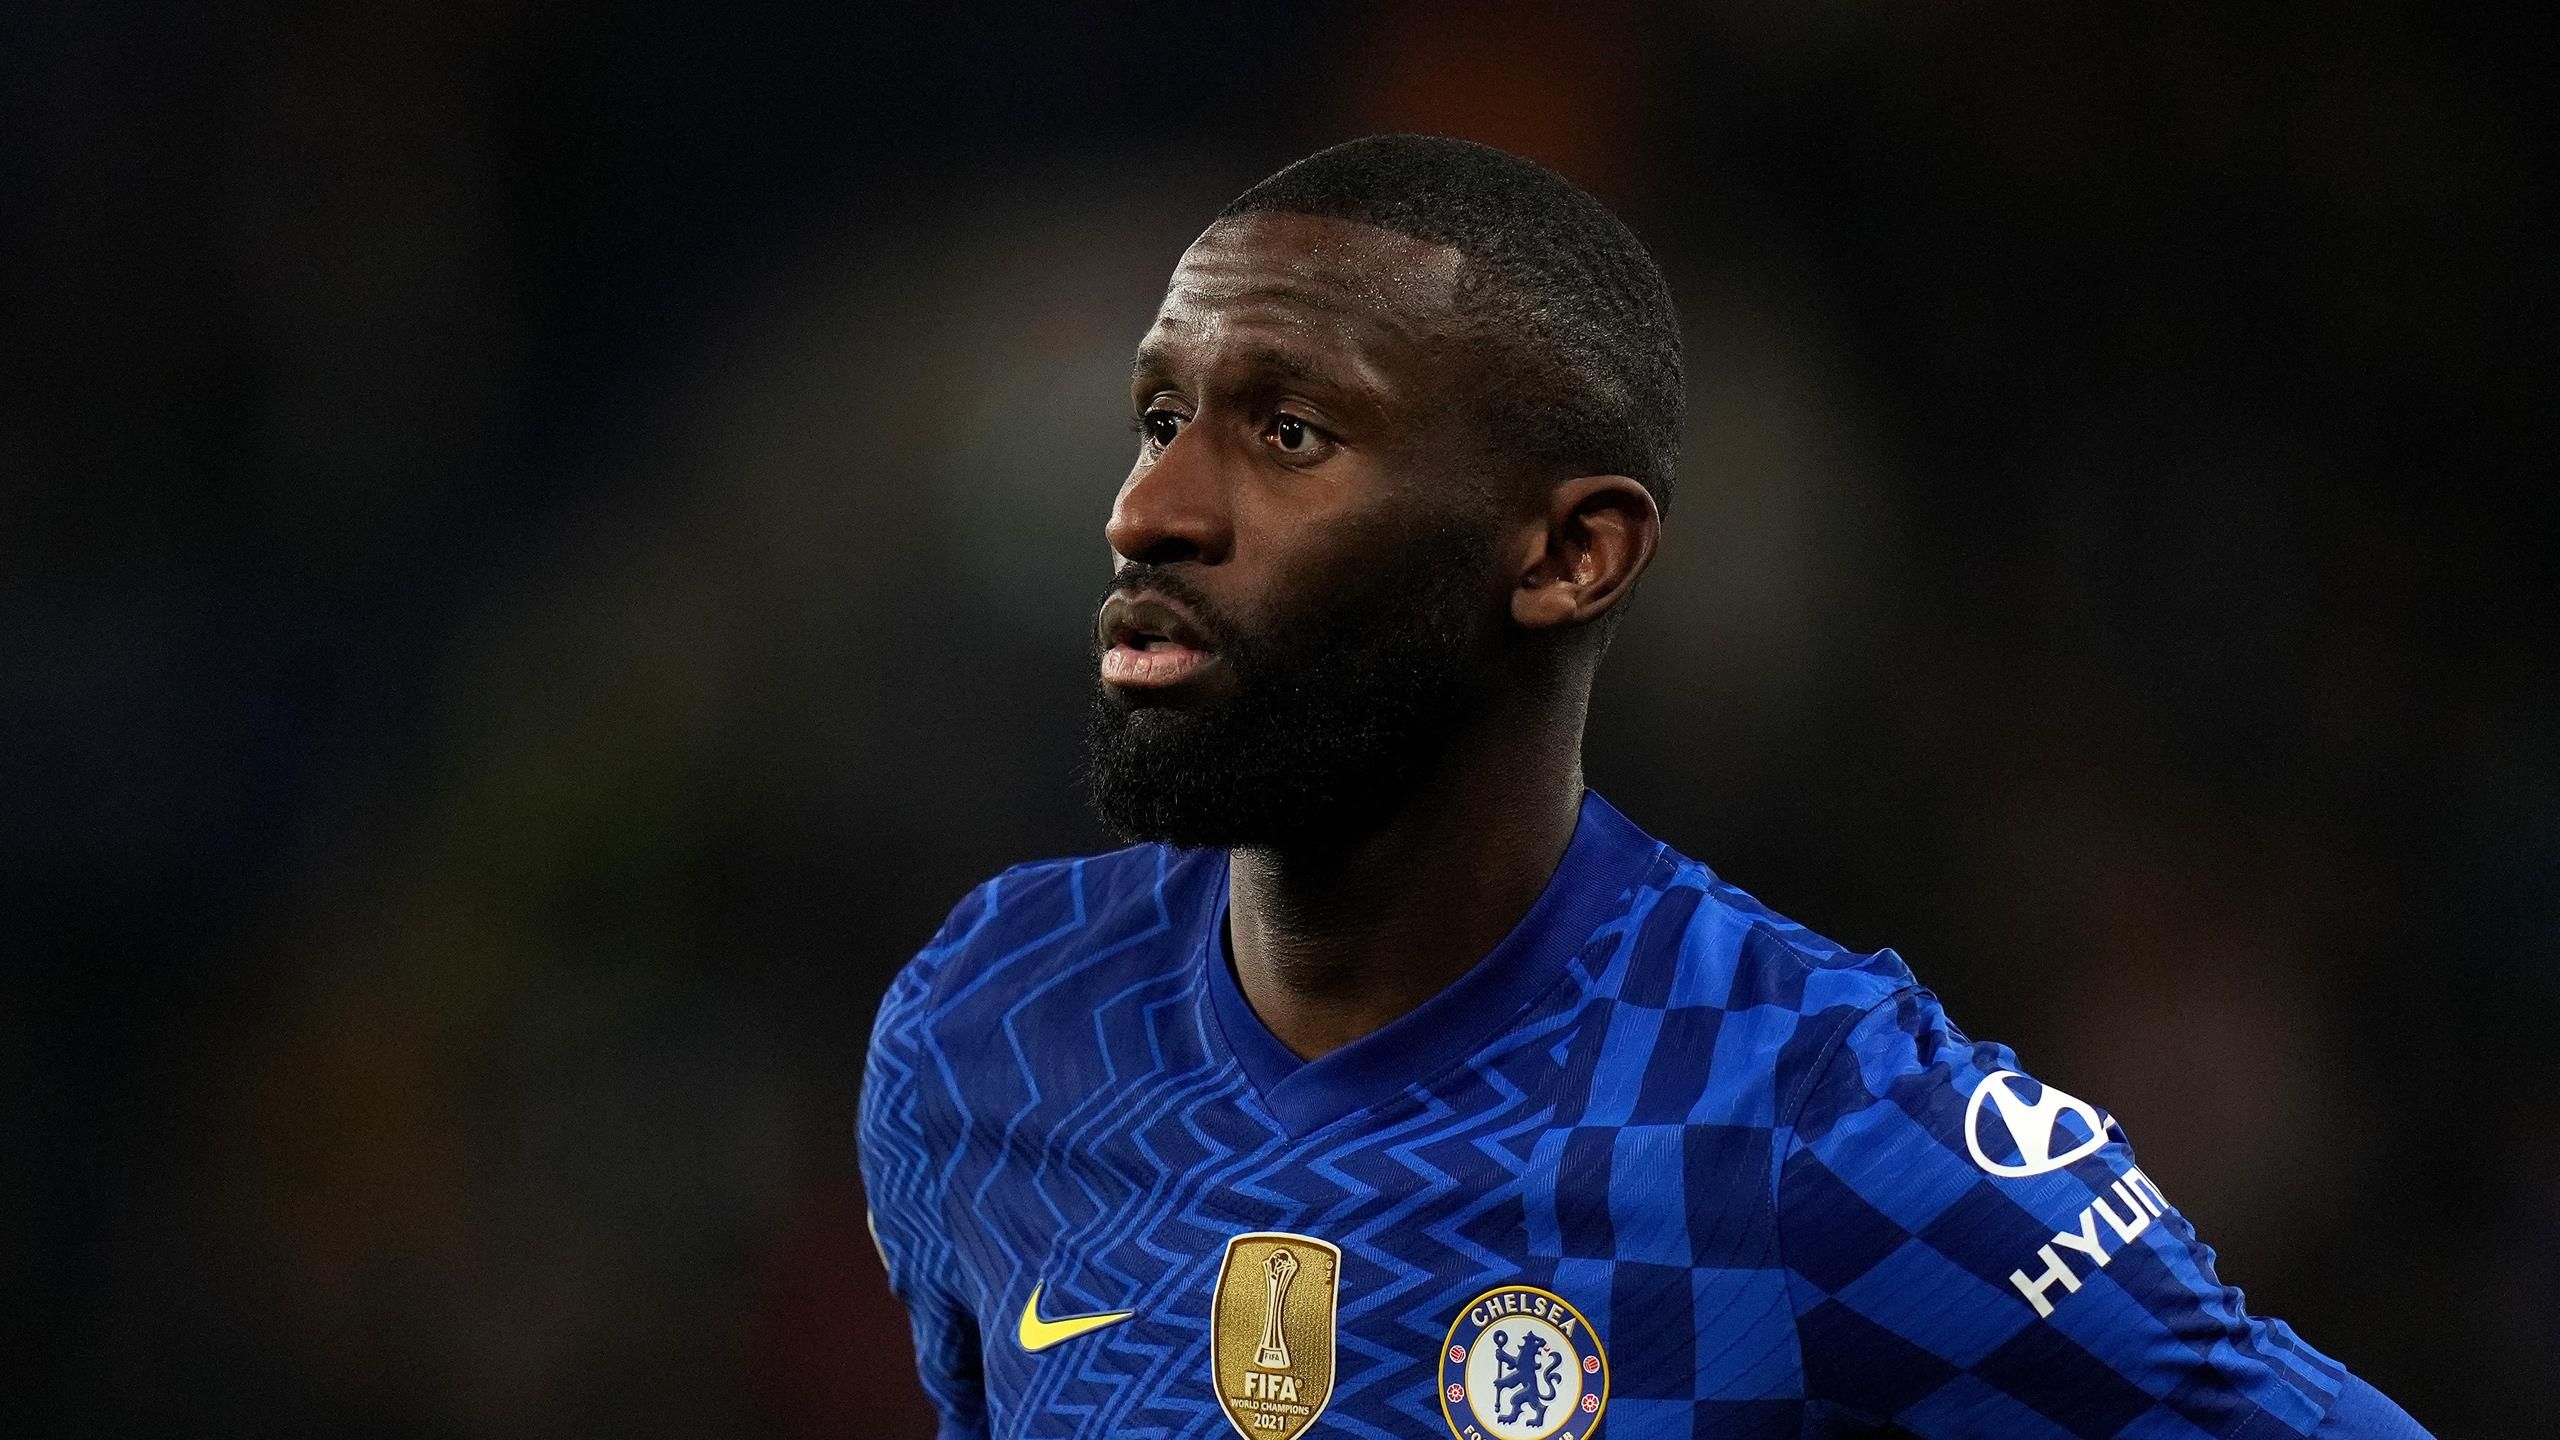 Manchester United plot shock move for Chelsea defender Antonio Rudiger amid Harry Maguire doubts